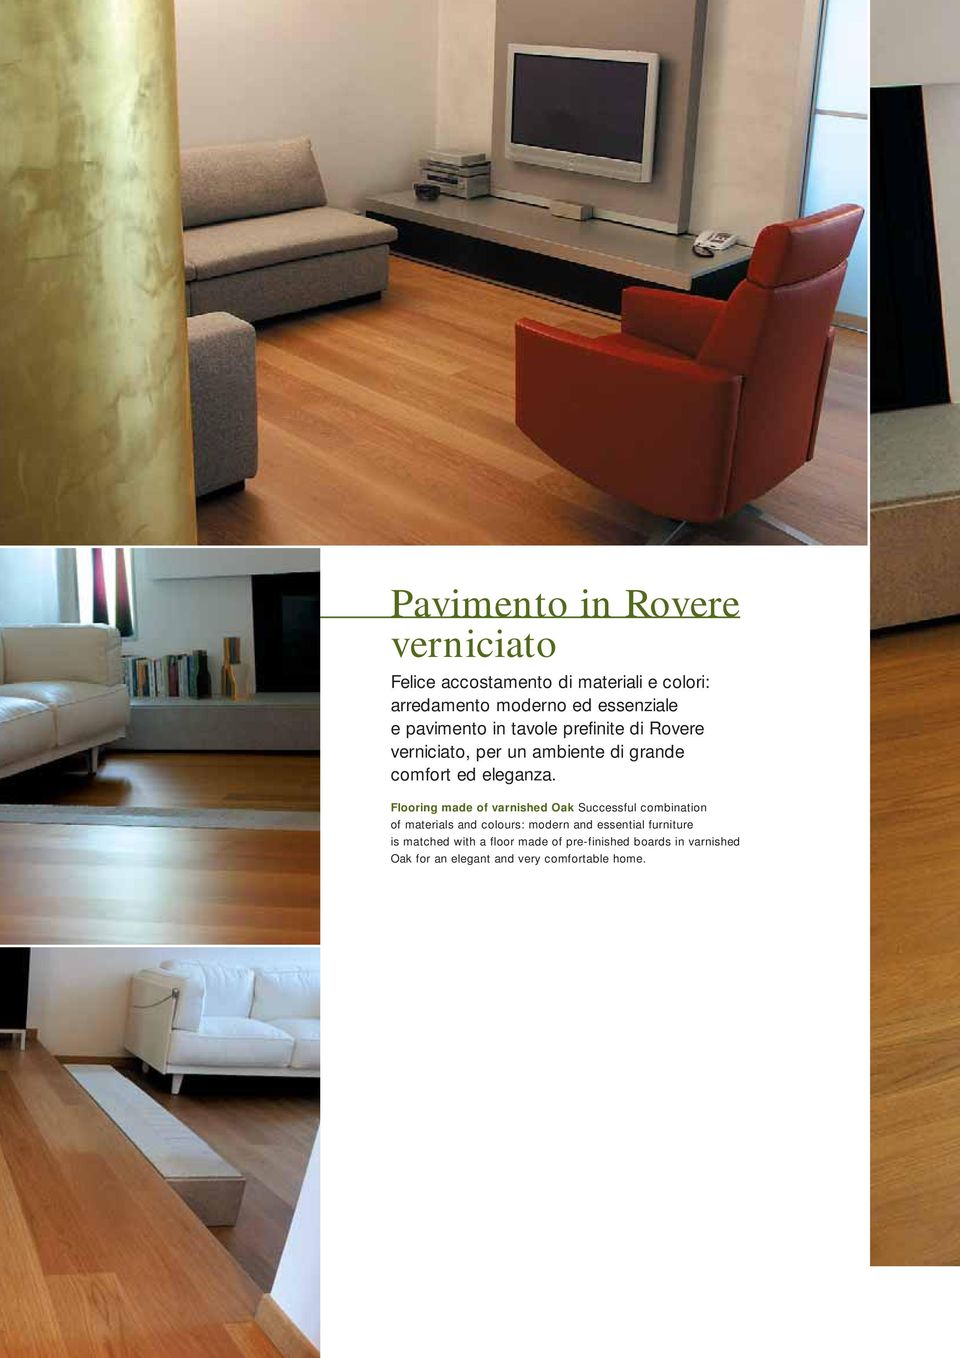 Flooring made of varnished Oak Successful combination of materials and colours: modern and essential